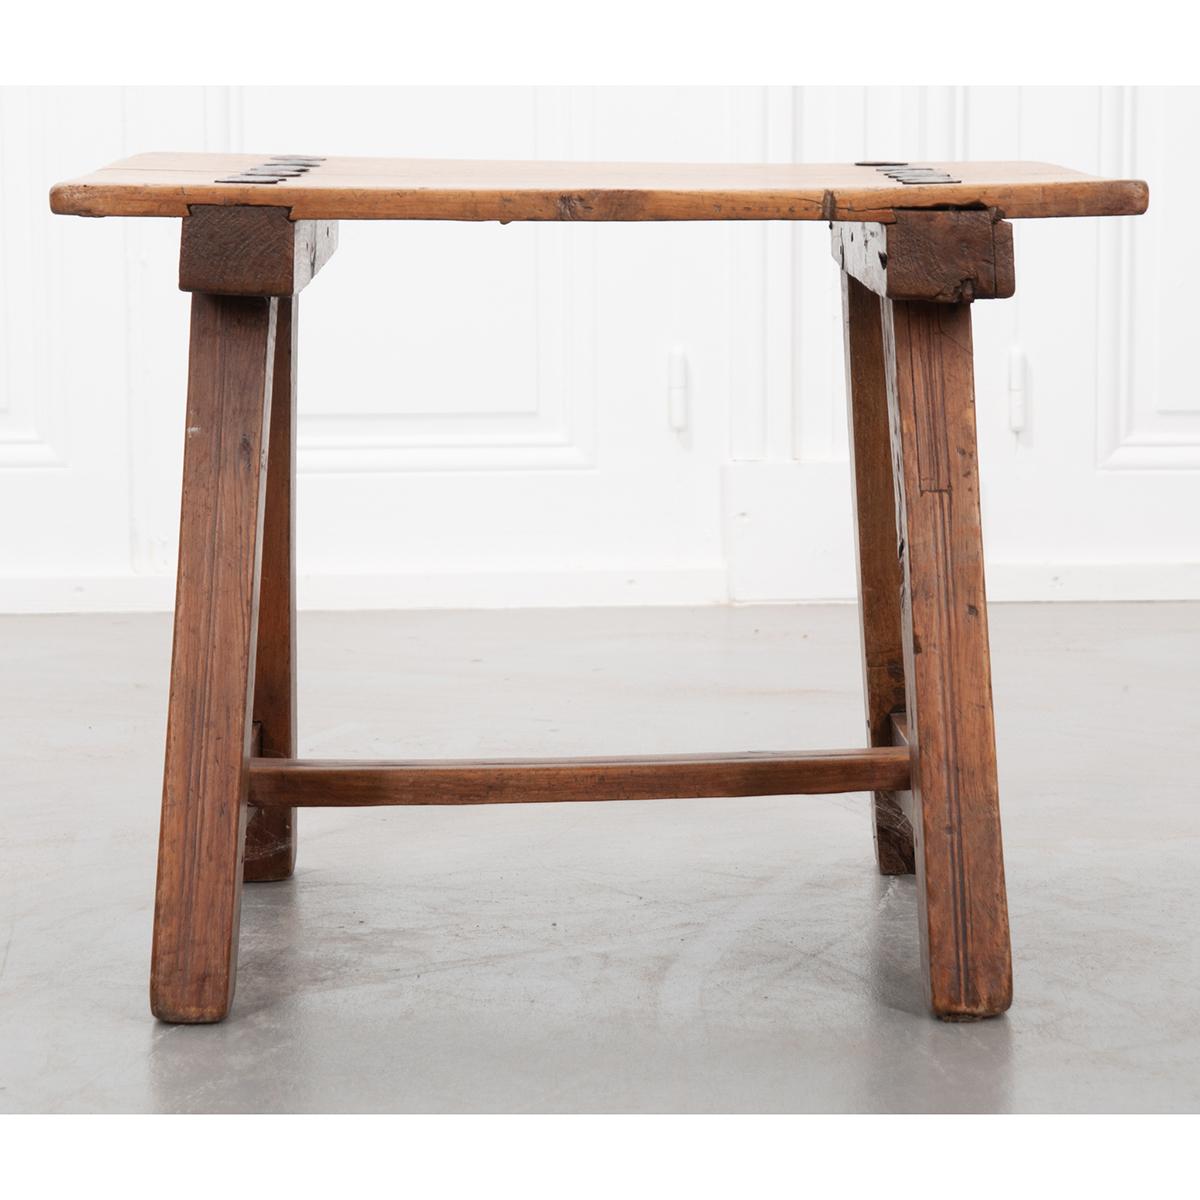 Simple but gorgeous antique table, circa 1840. The wood top is held to the frame with large, hand forged, iron nails. The trestle-style frame itself has mortise and Tenon joints held together with wooden pegs. Exposed dovetail-like joinery adds